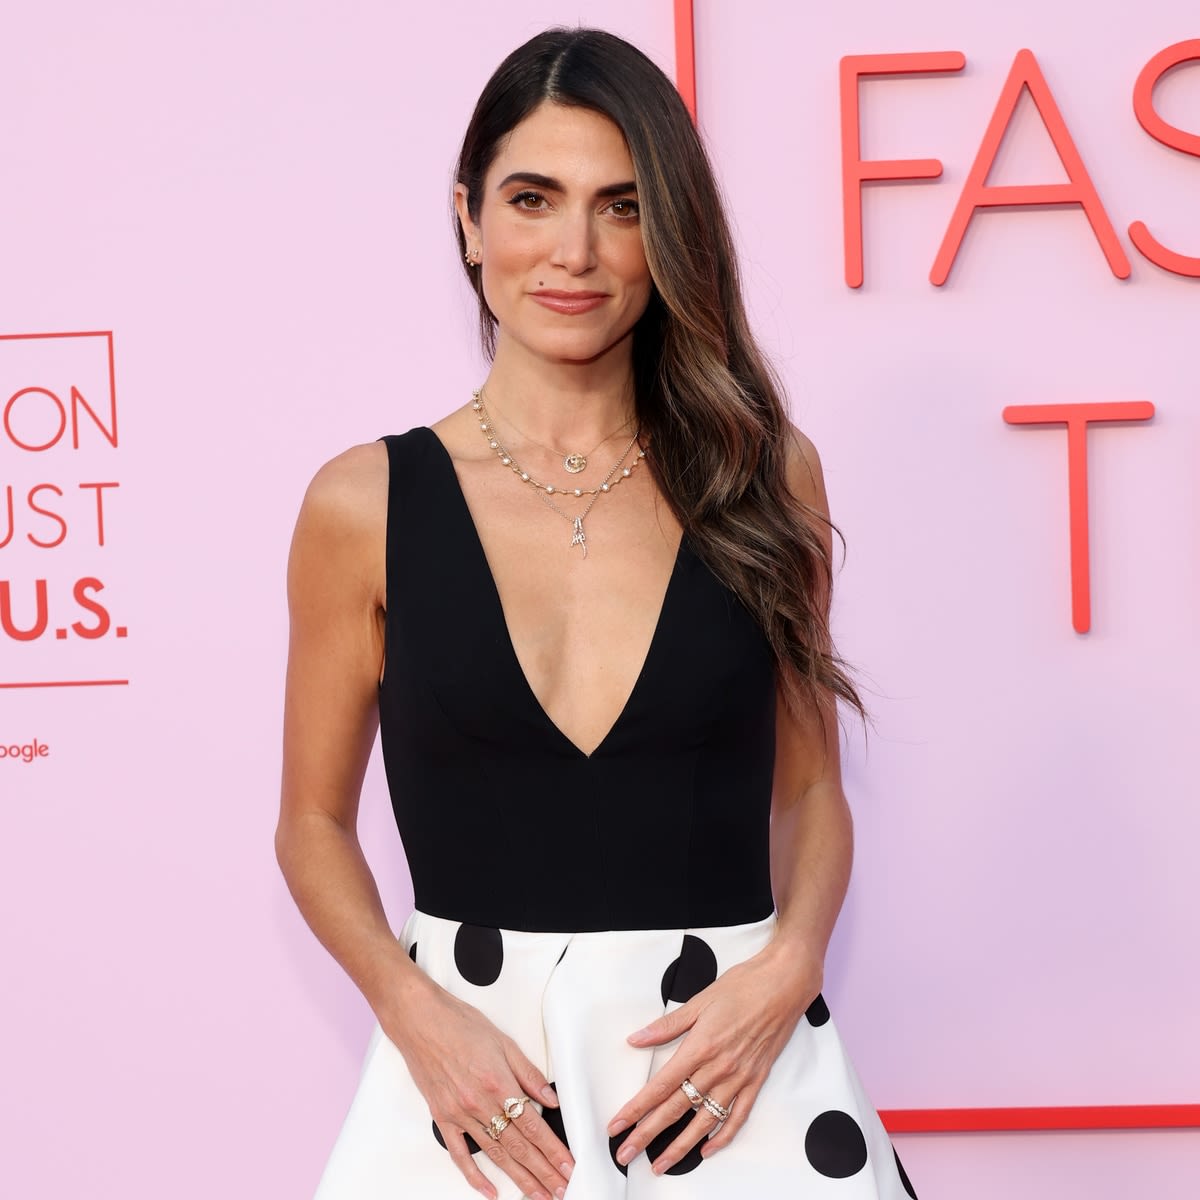 Nikki Reed Shares Rare Look Into Her Family Life With Ian Somerhalder